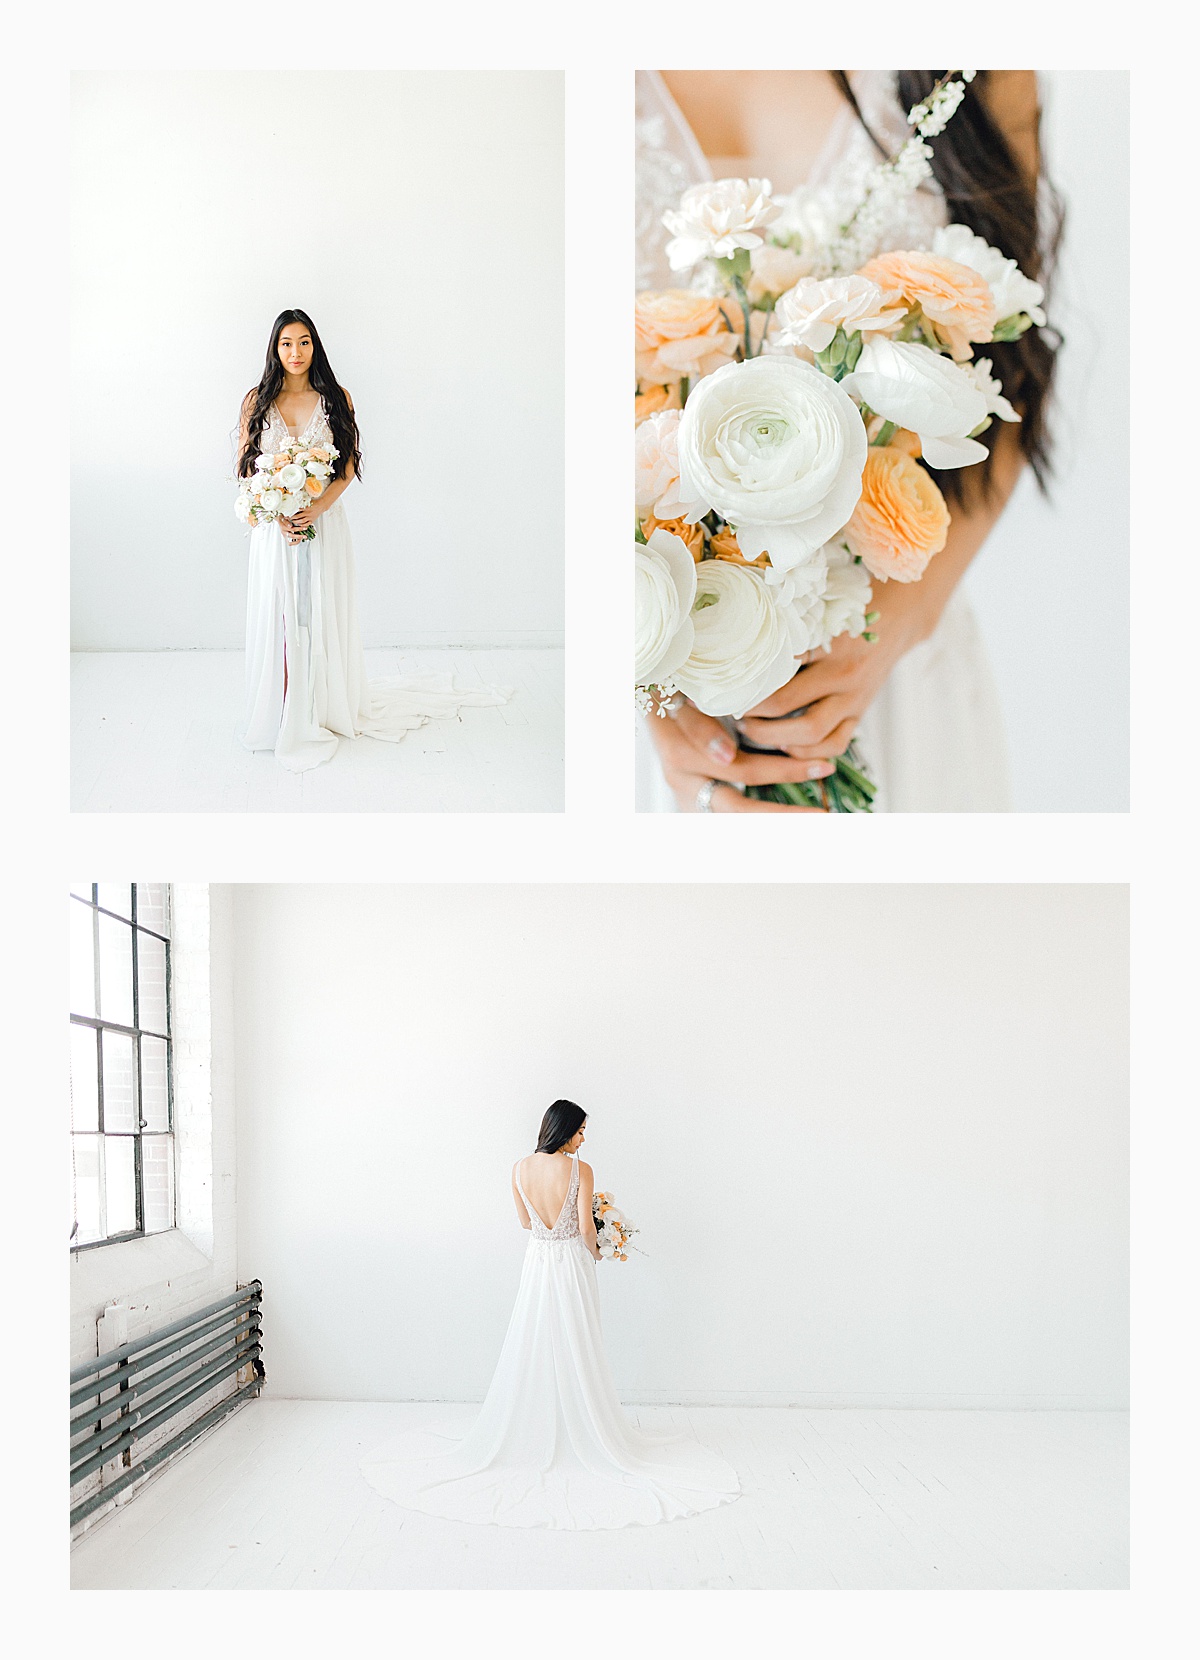 The Bemis Building in downtown Seattle is one of my favorite places to use for photo shoots!  This styled bridal shoot with touches of peach and white was dreamy.  #emmarosecompany #kindredpresets #seattlebride_0013.jpg